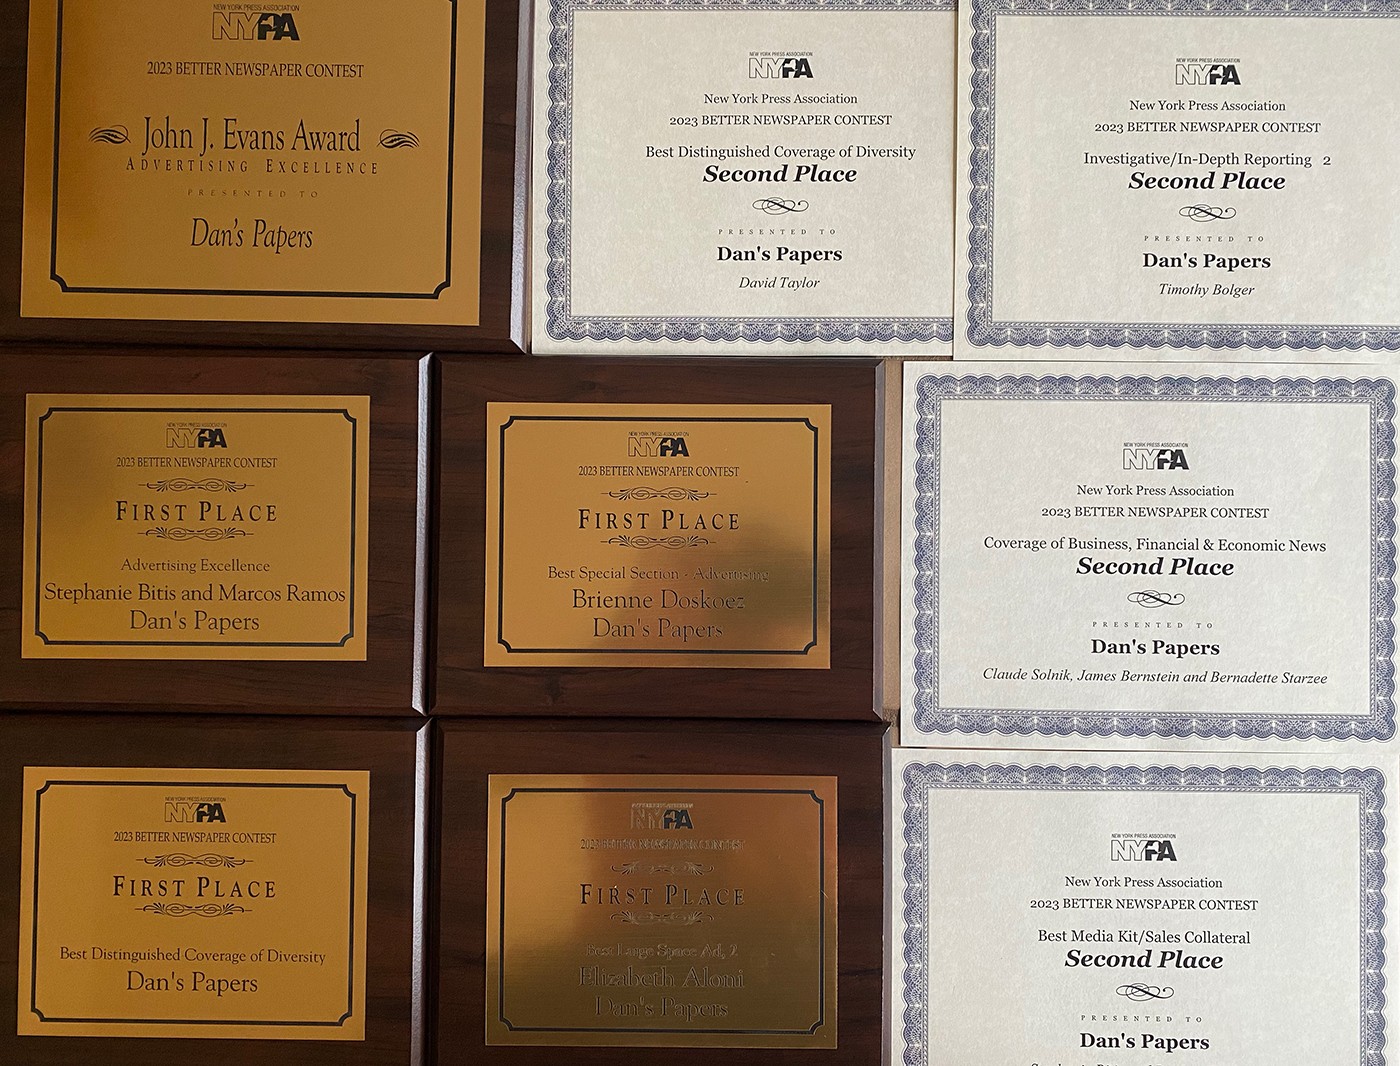 Dan's Papers took home a number of 2024 New York Press Association Better Newspaper Awards at the Spring Conference this year